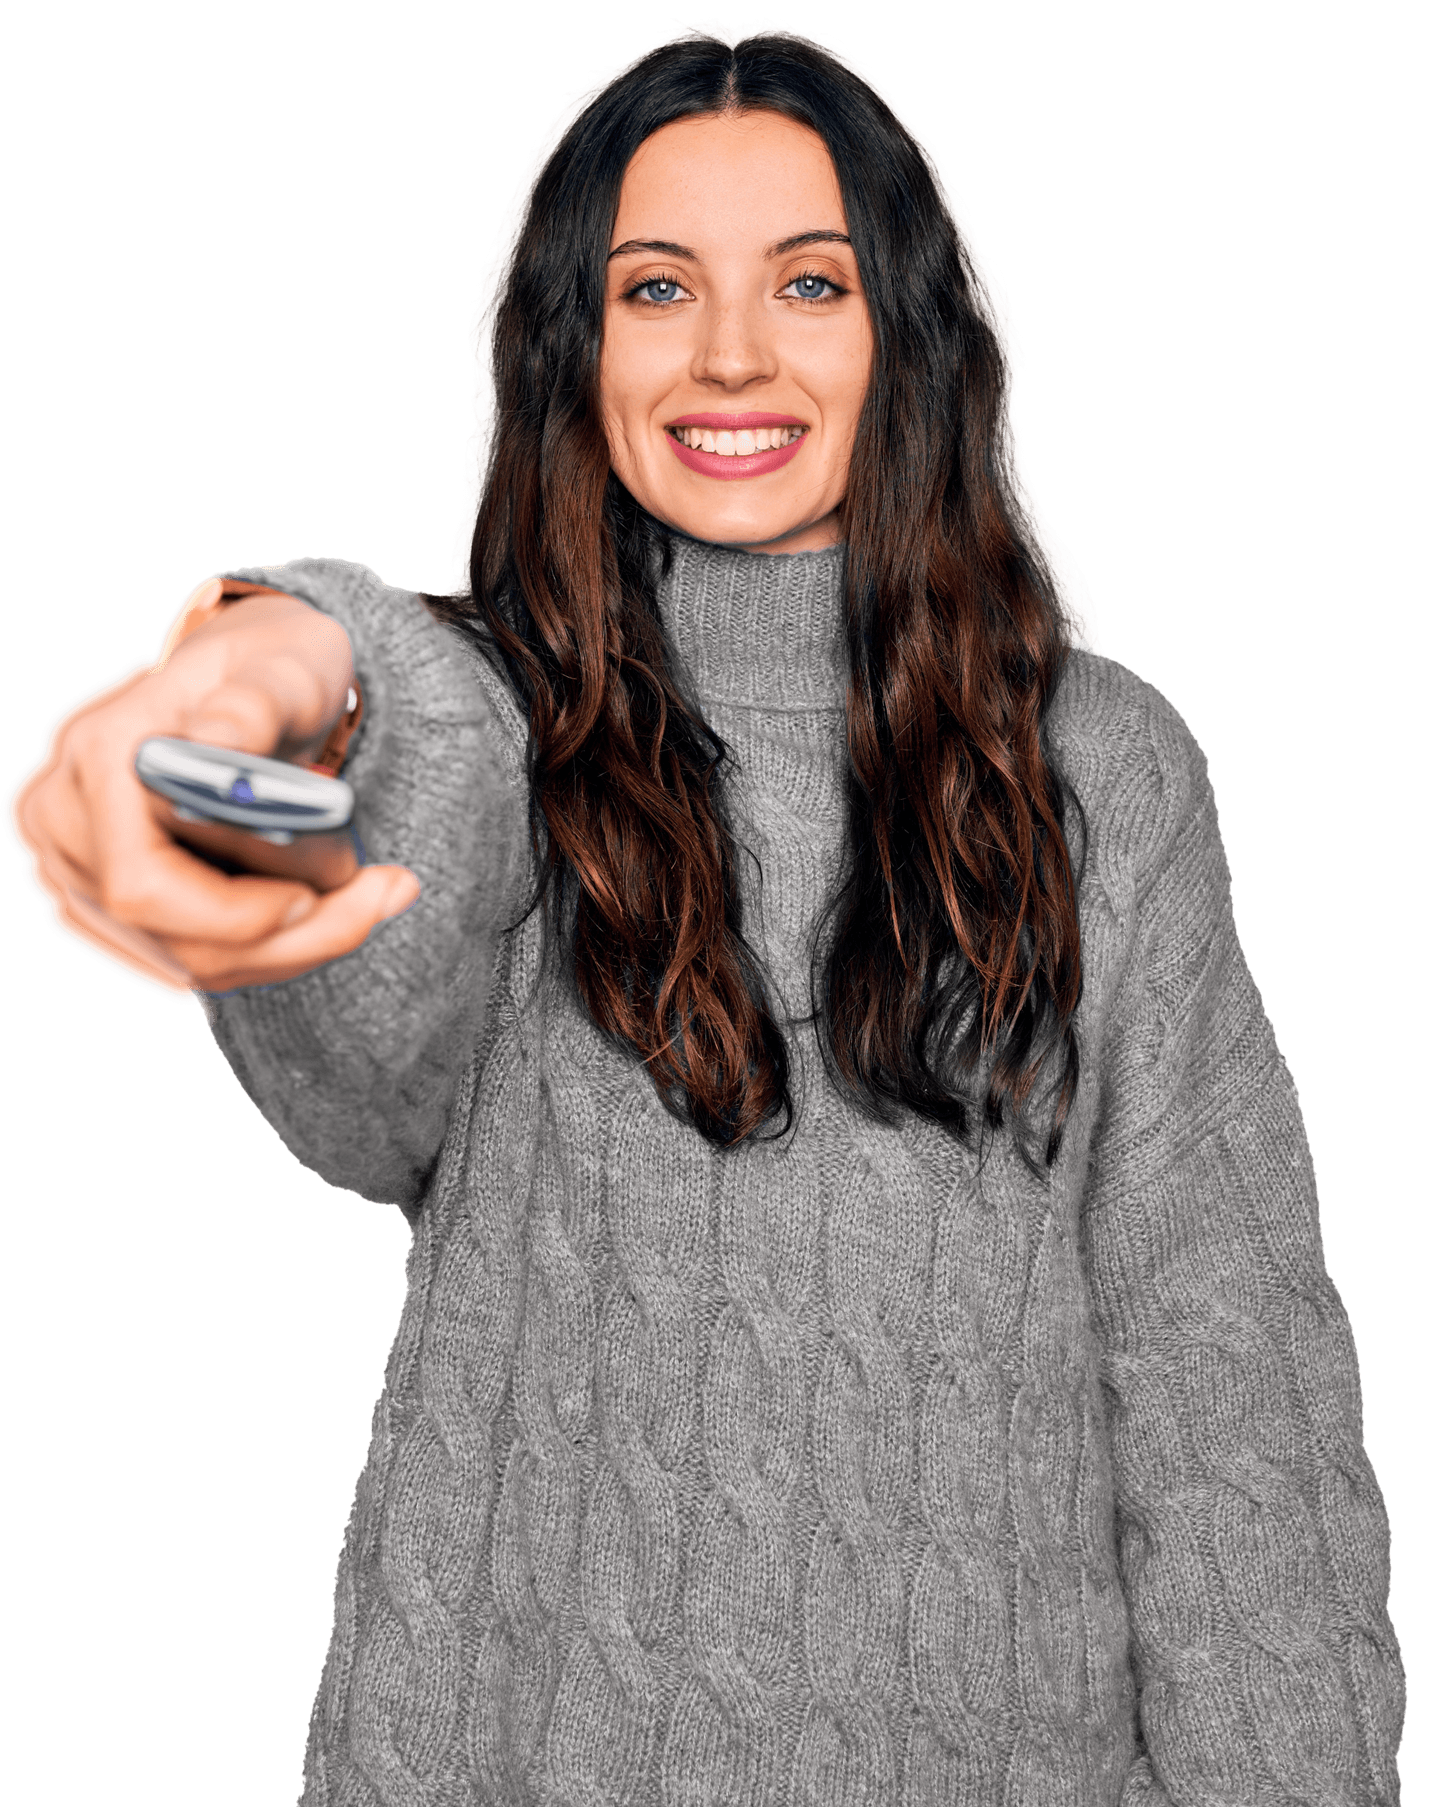 A woman holding out a TV remote